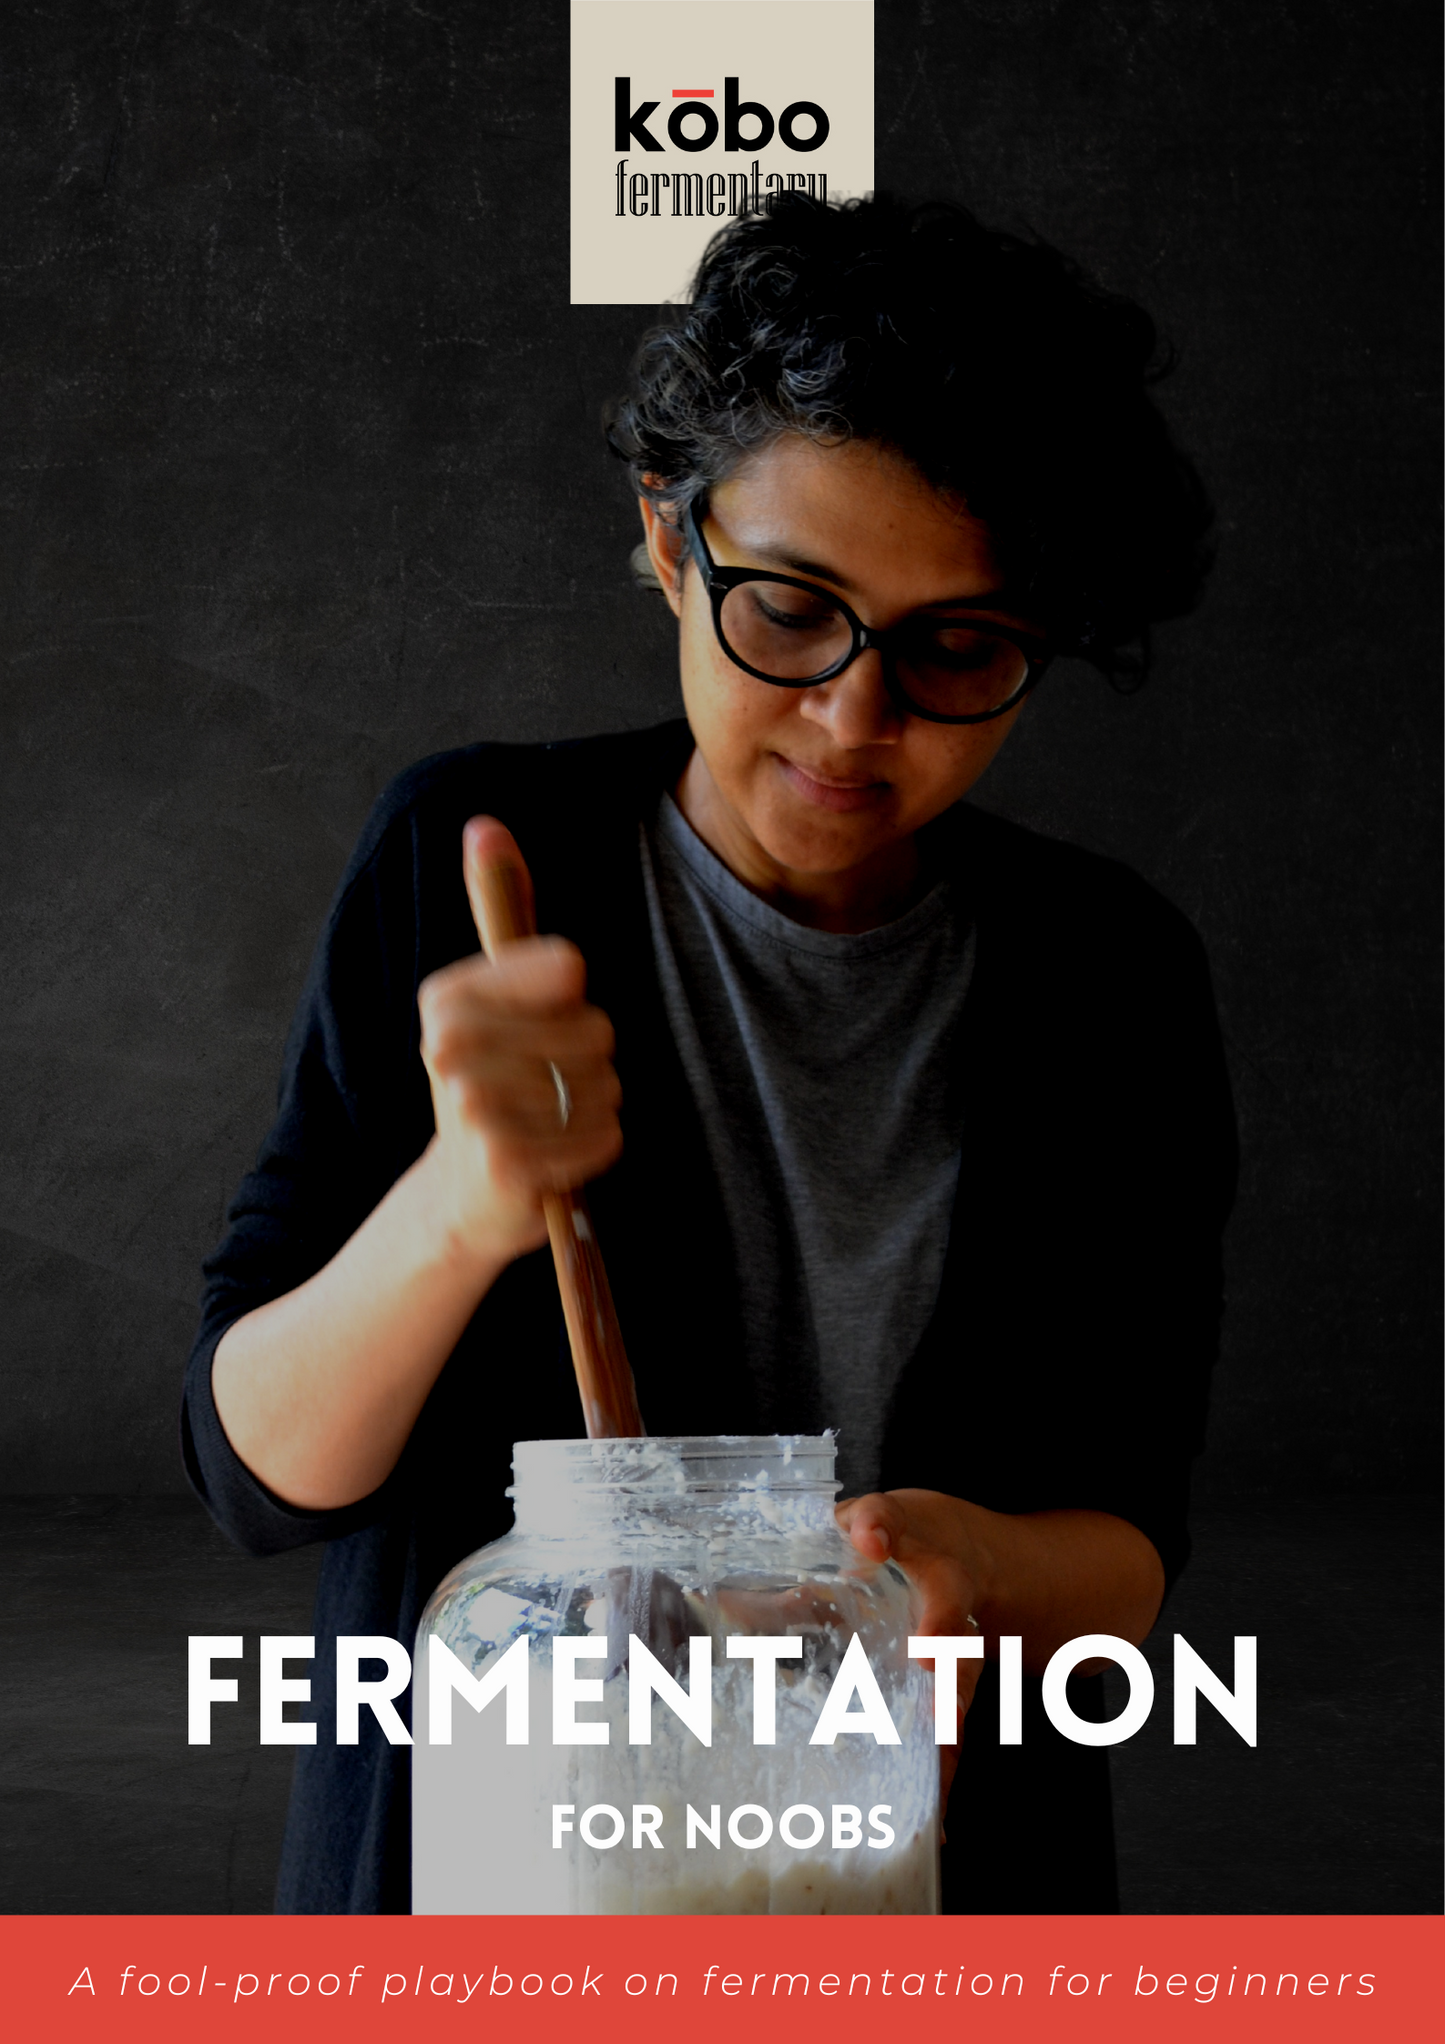 Fermentation for Noobs - A fool-proof playbook on fermentation for beginners